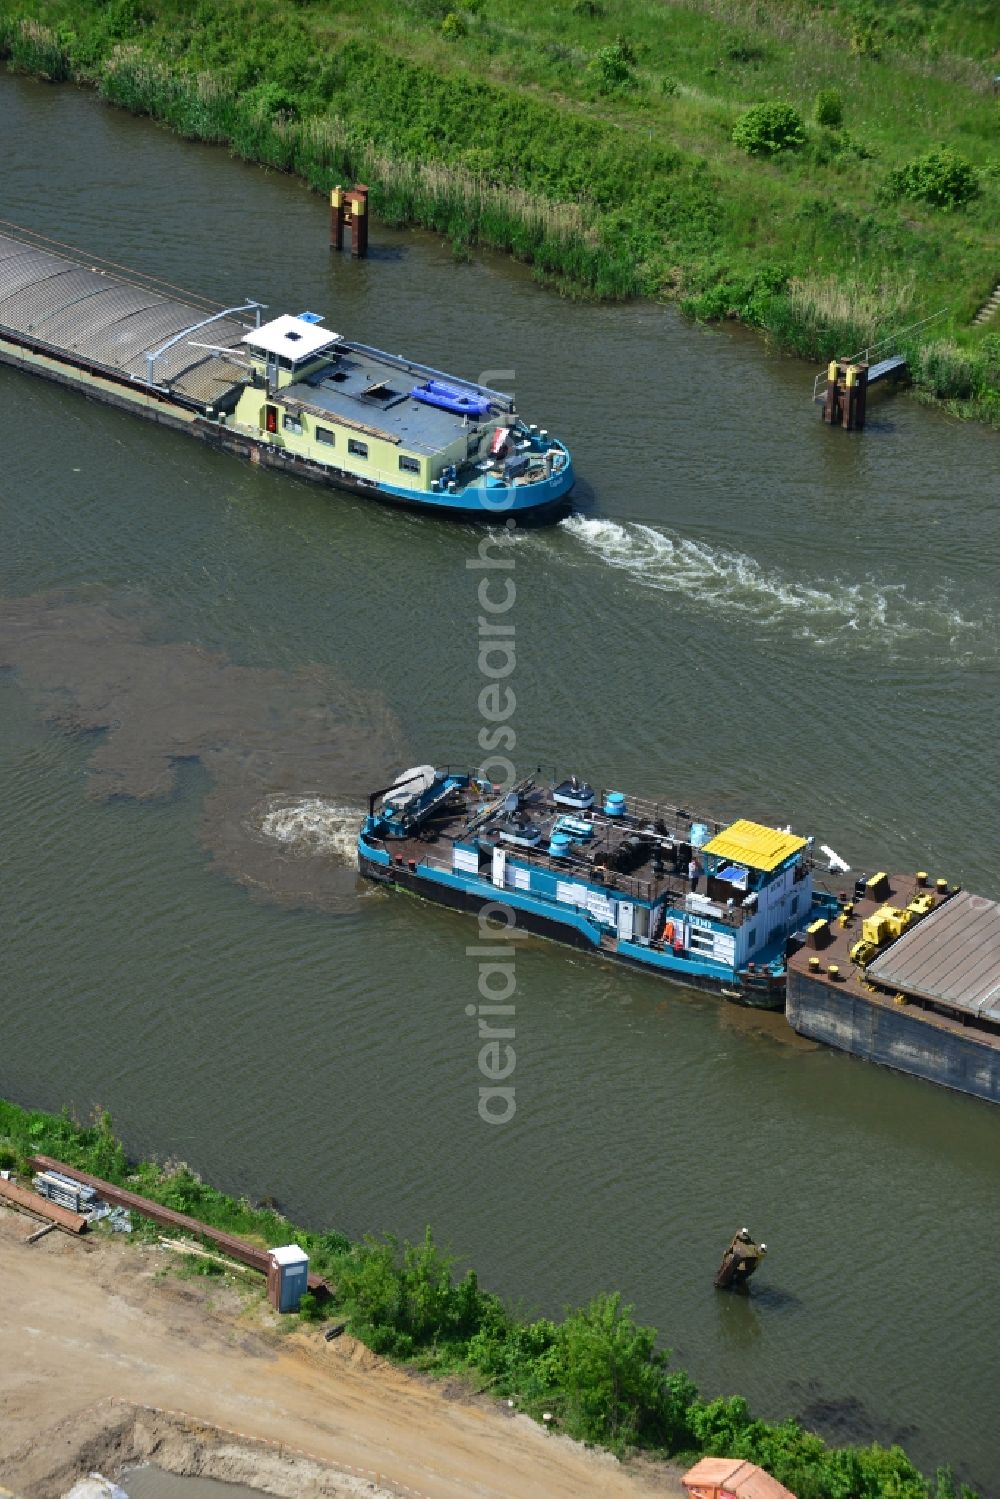 Zerben from above - Ship traffic of convoys in the area of ??Zerben lock on the waterway of the Elbe-Havel Canal in the state of Saxony-Anhalt